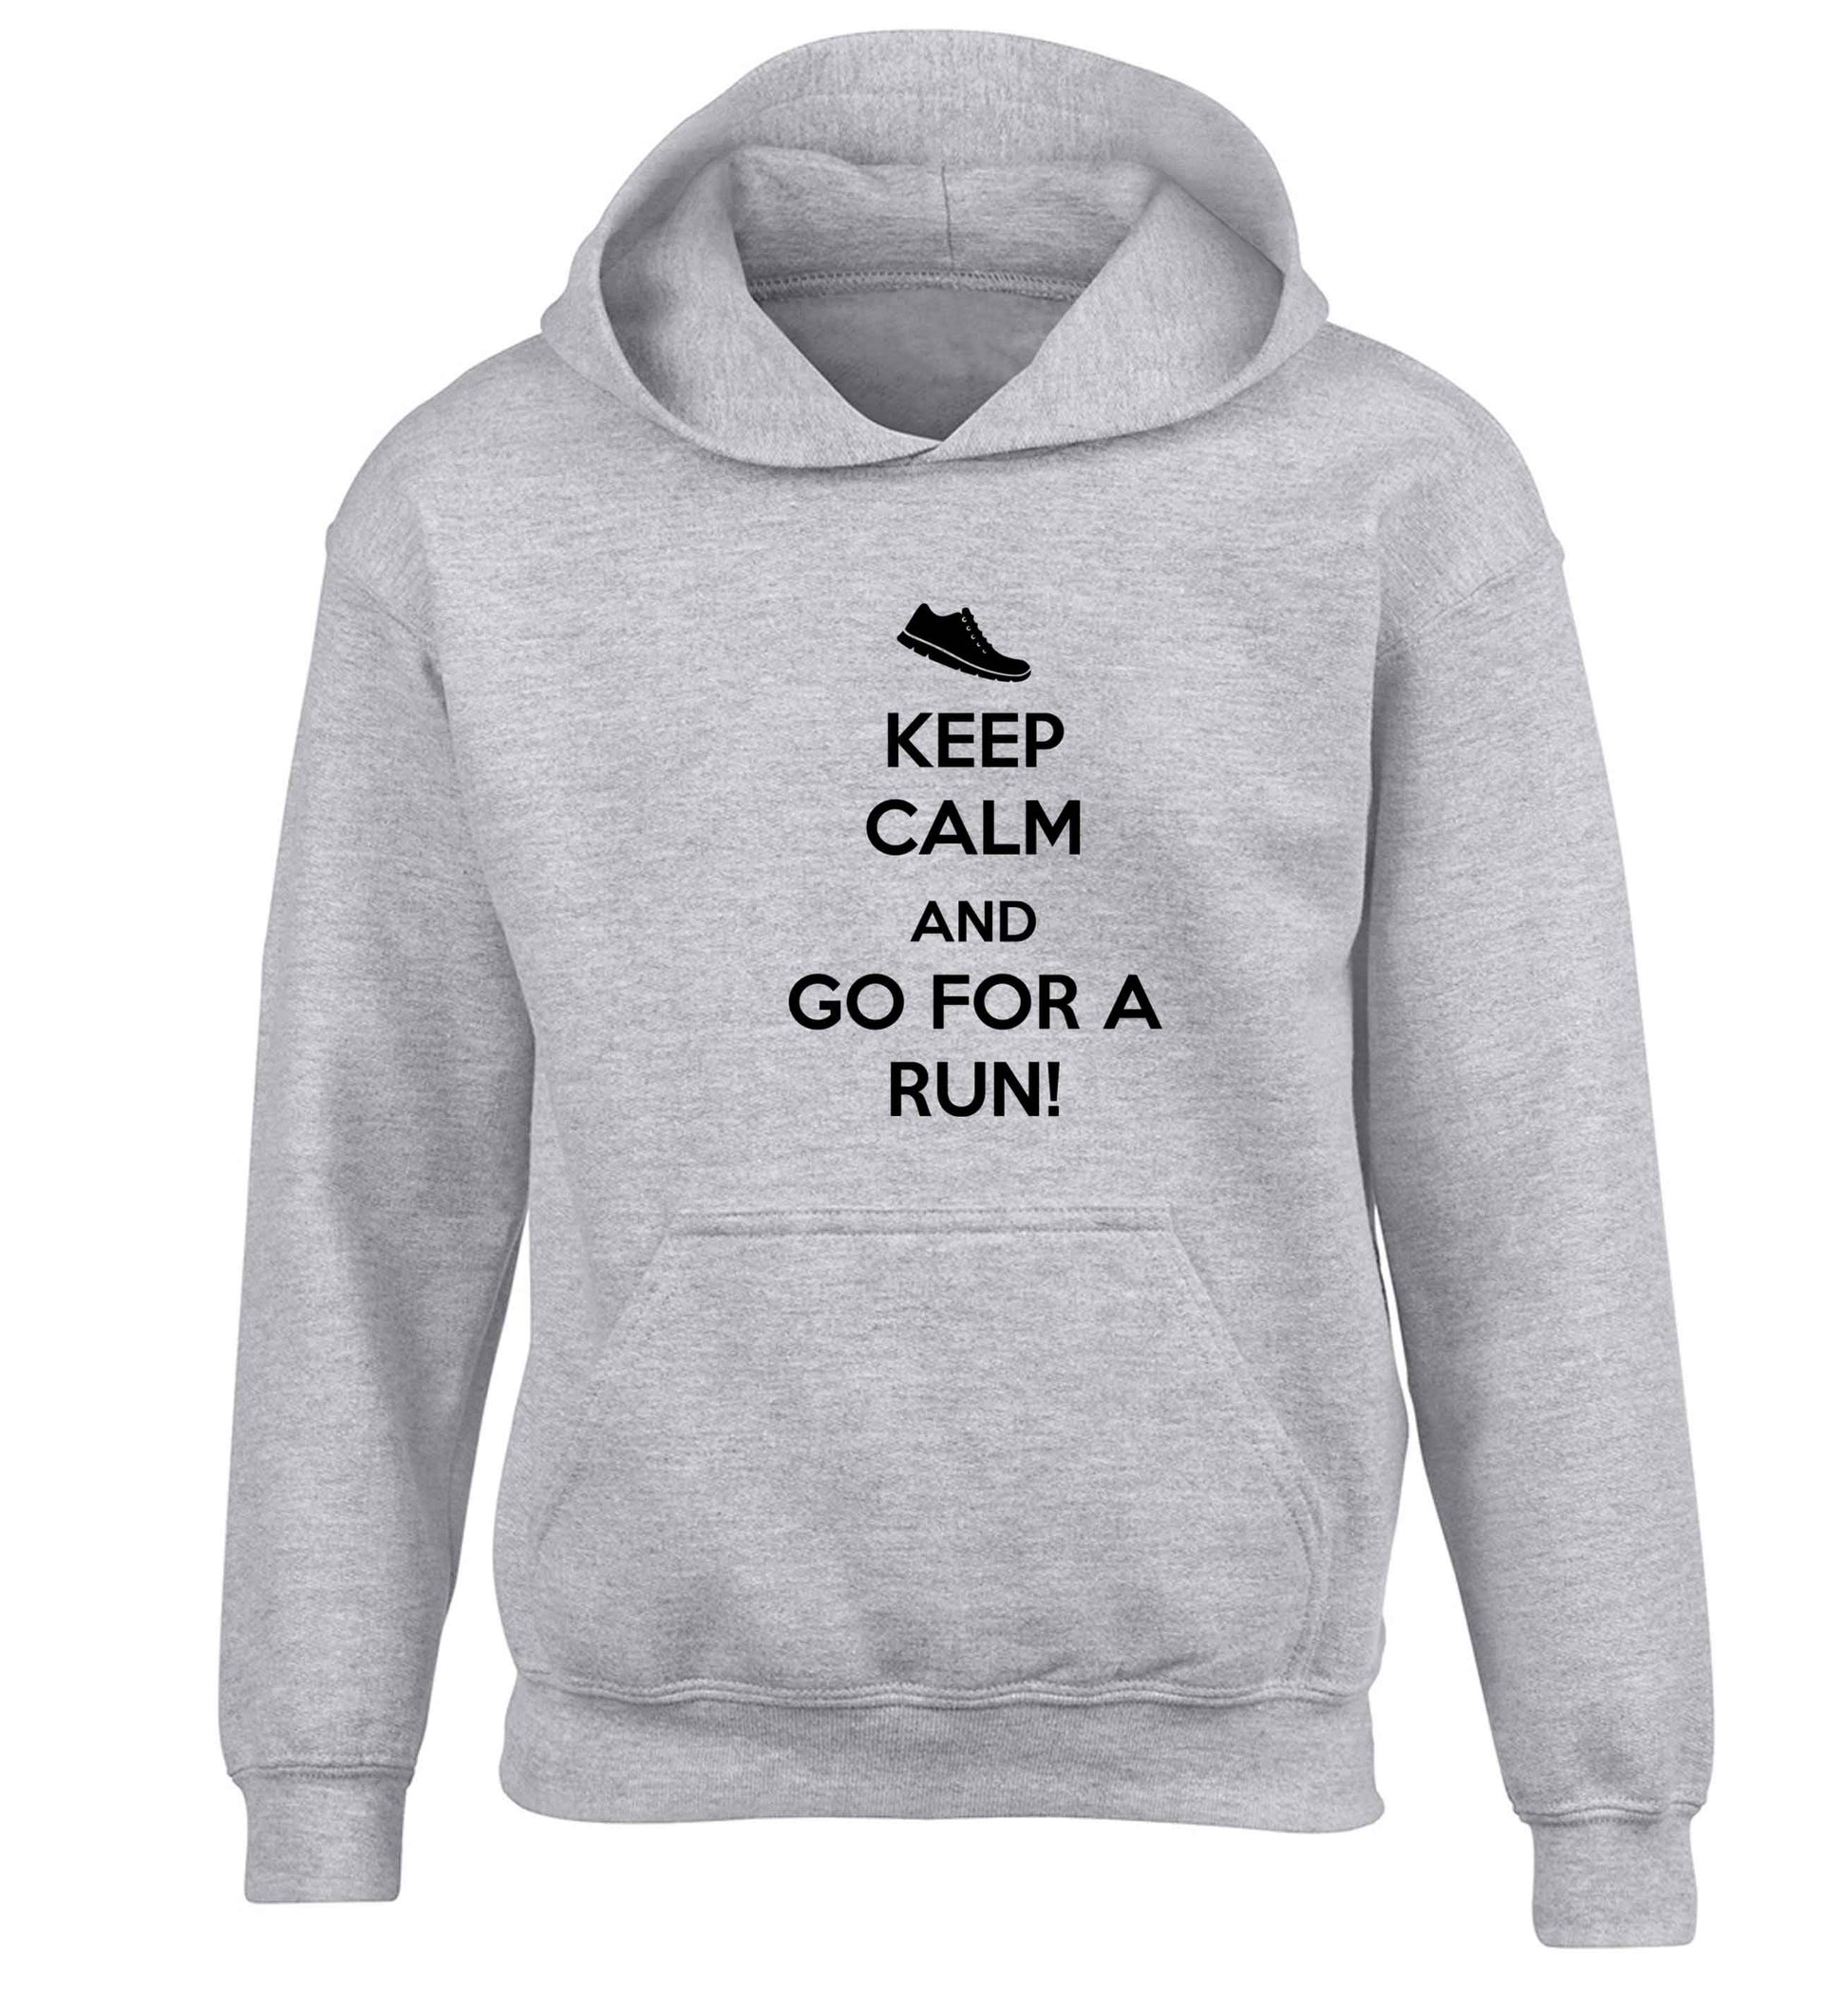 Keep calm and go for a run children's grey hoodie 12-13 Years